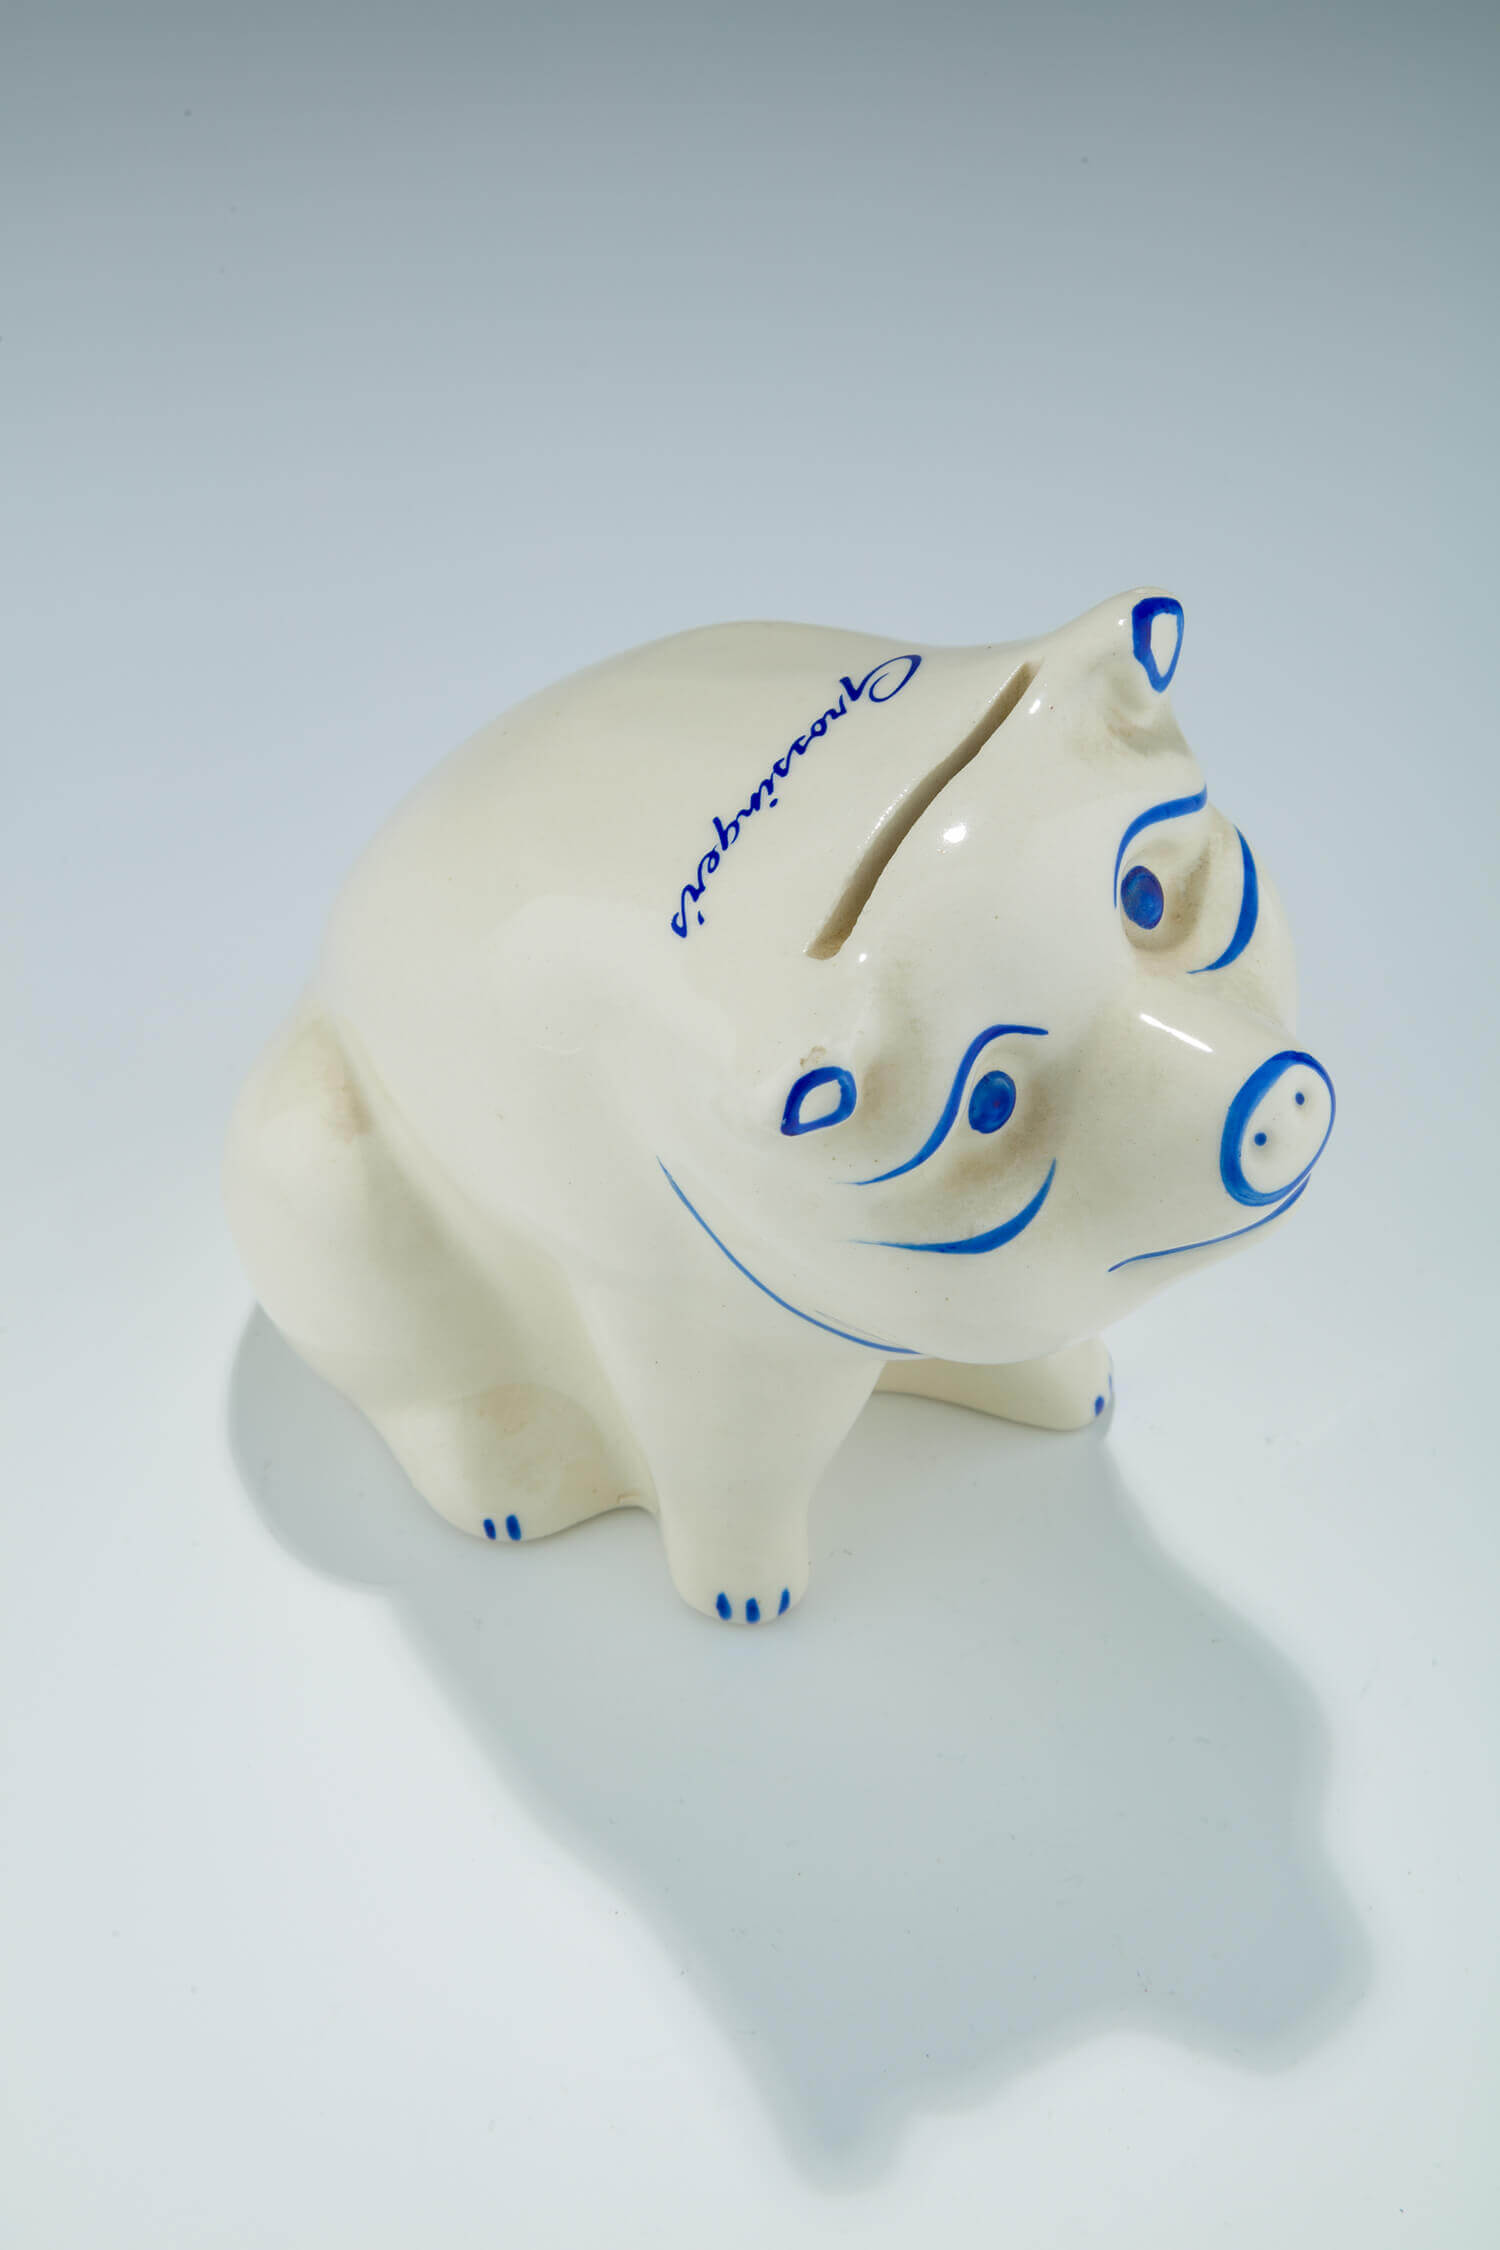 109. A CERAMIC PIGGY BANK FROM THE GROSSINGER’S RESORT